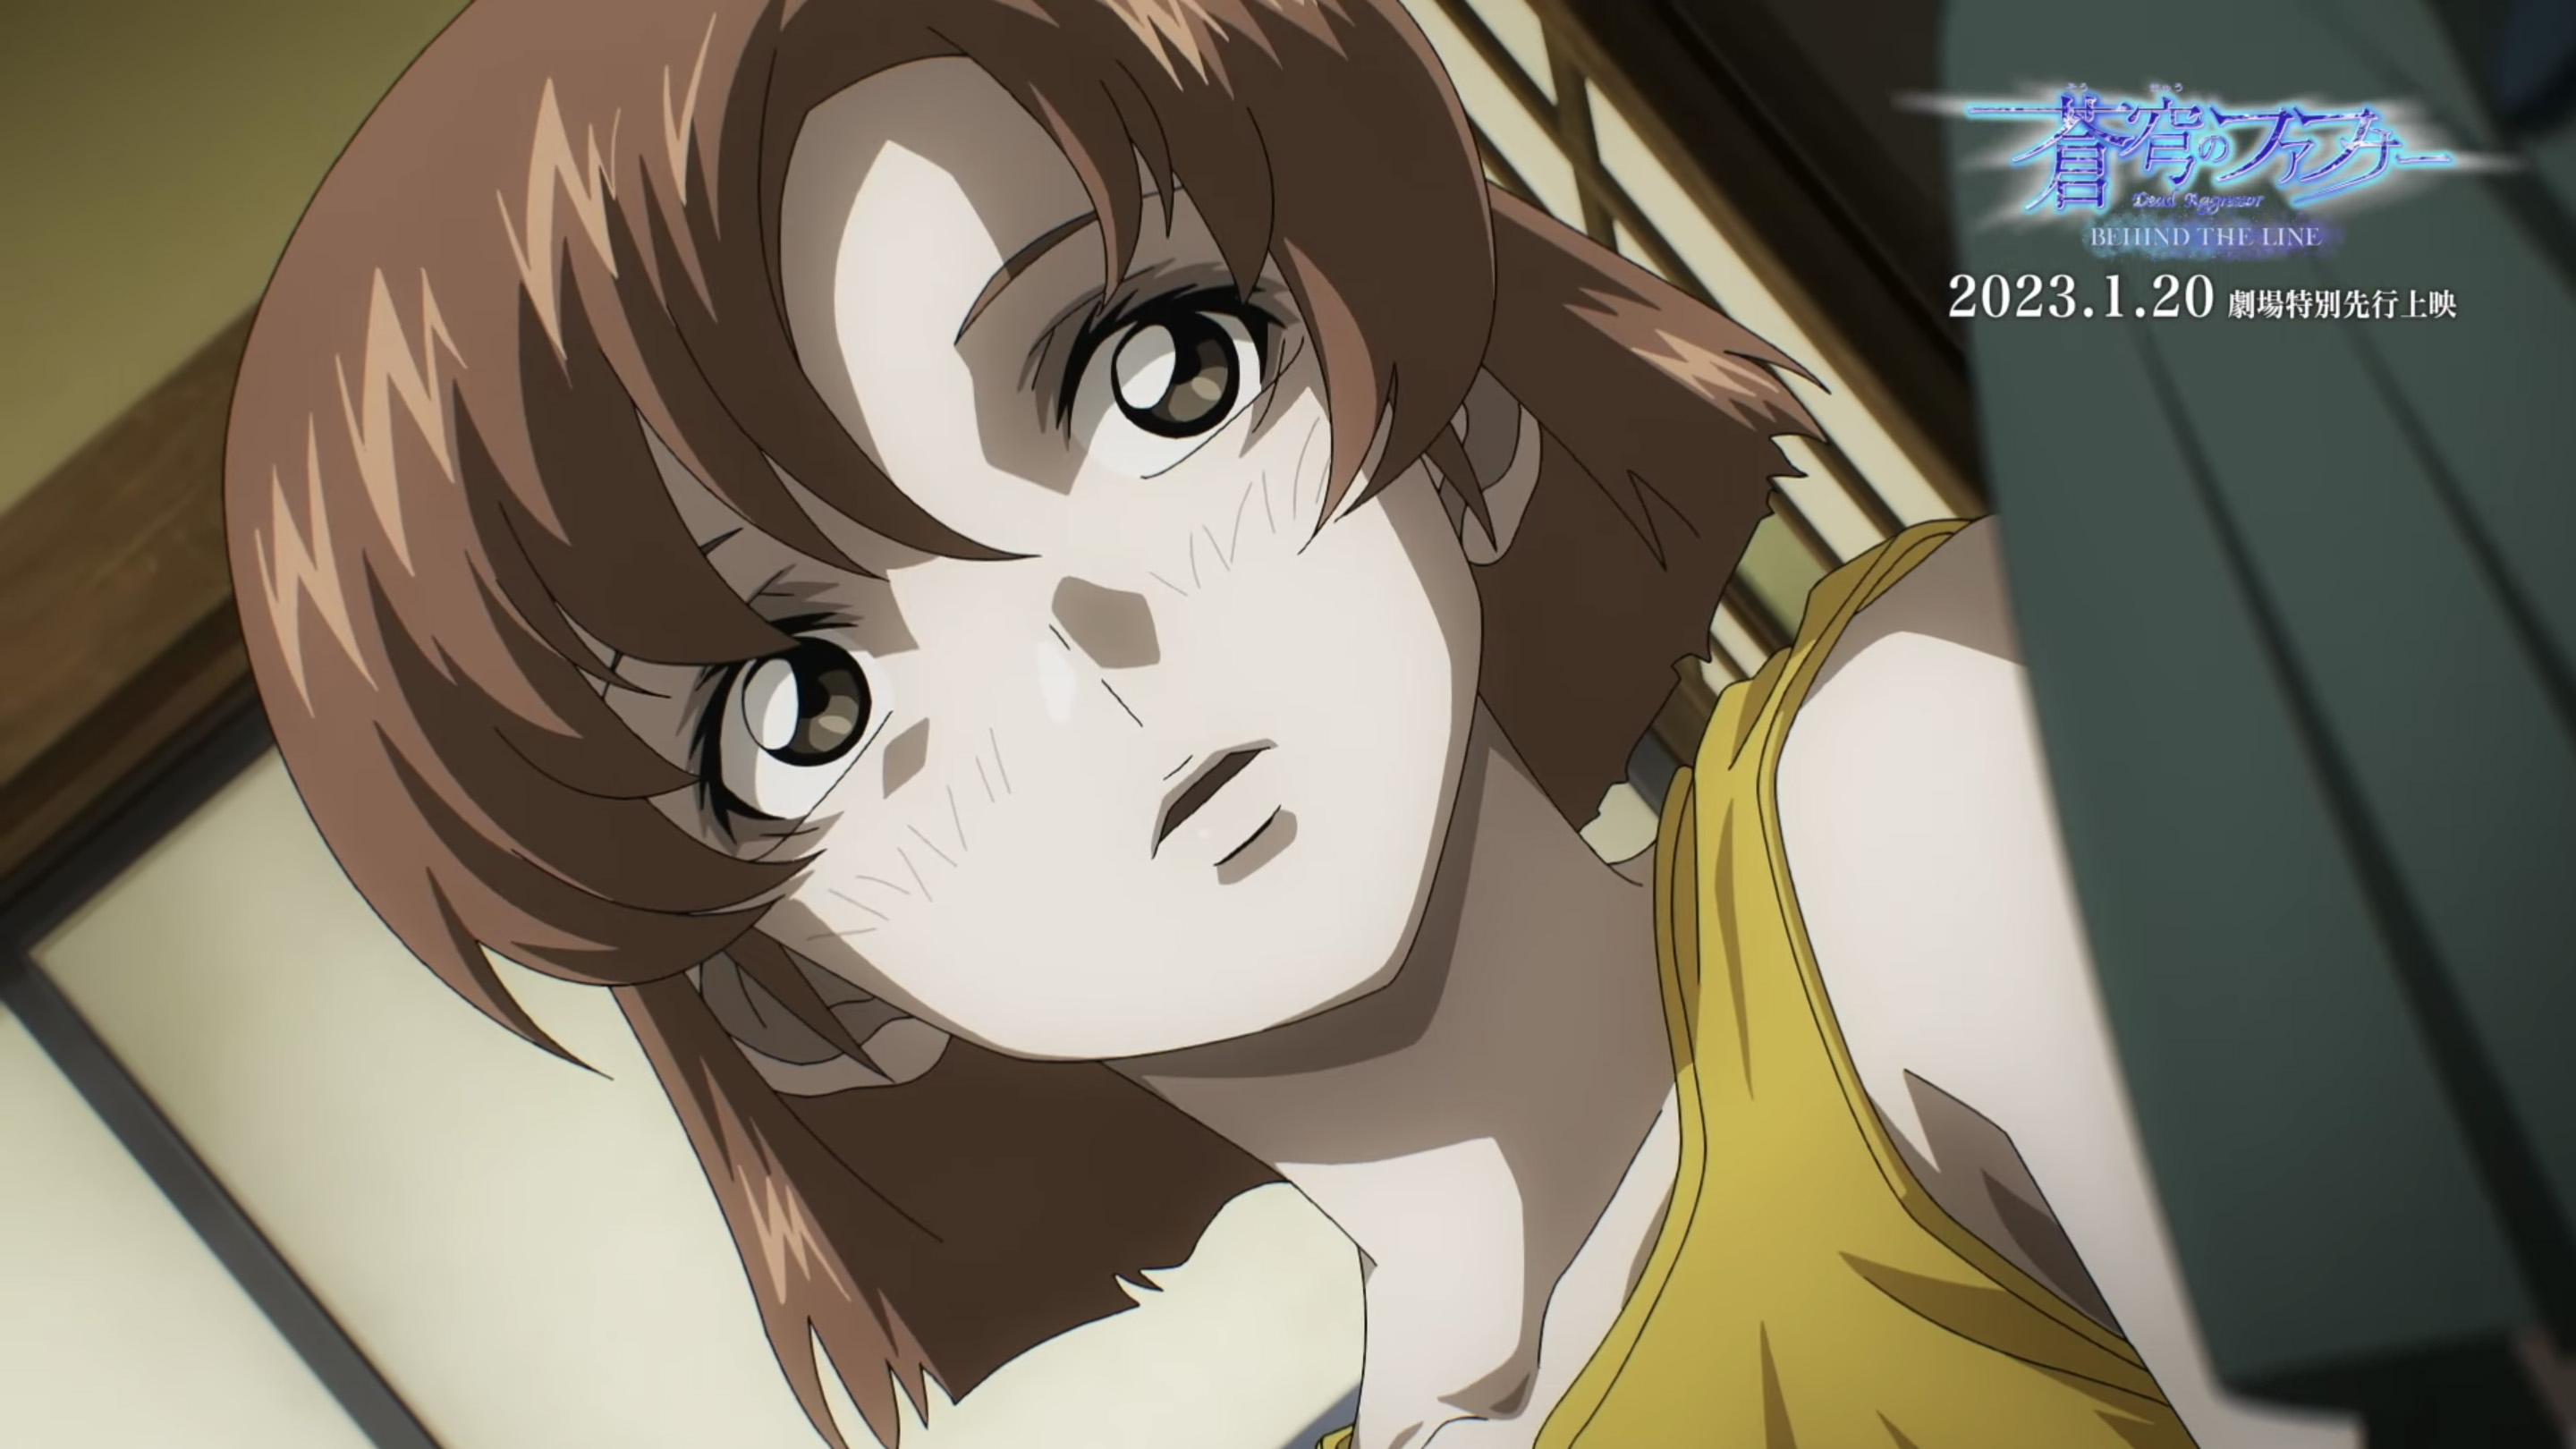 Fafner in the Azure Spin-off BEHIND THE LINE Gets January 20 Theatrical Release